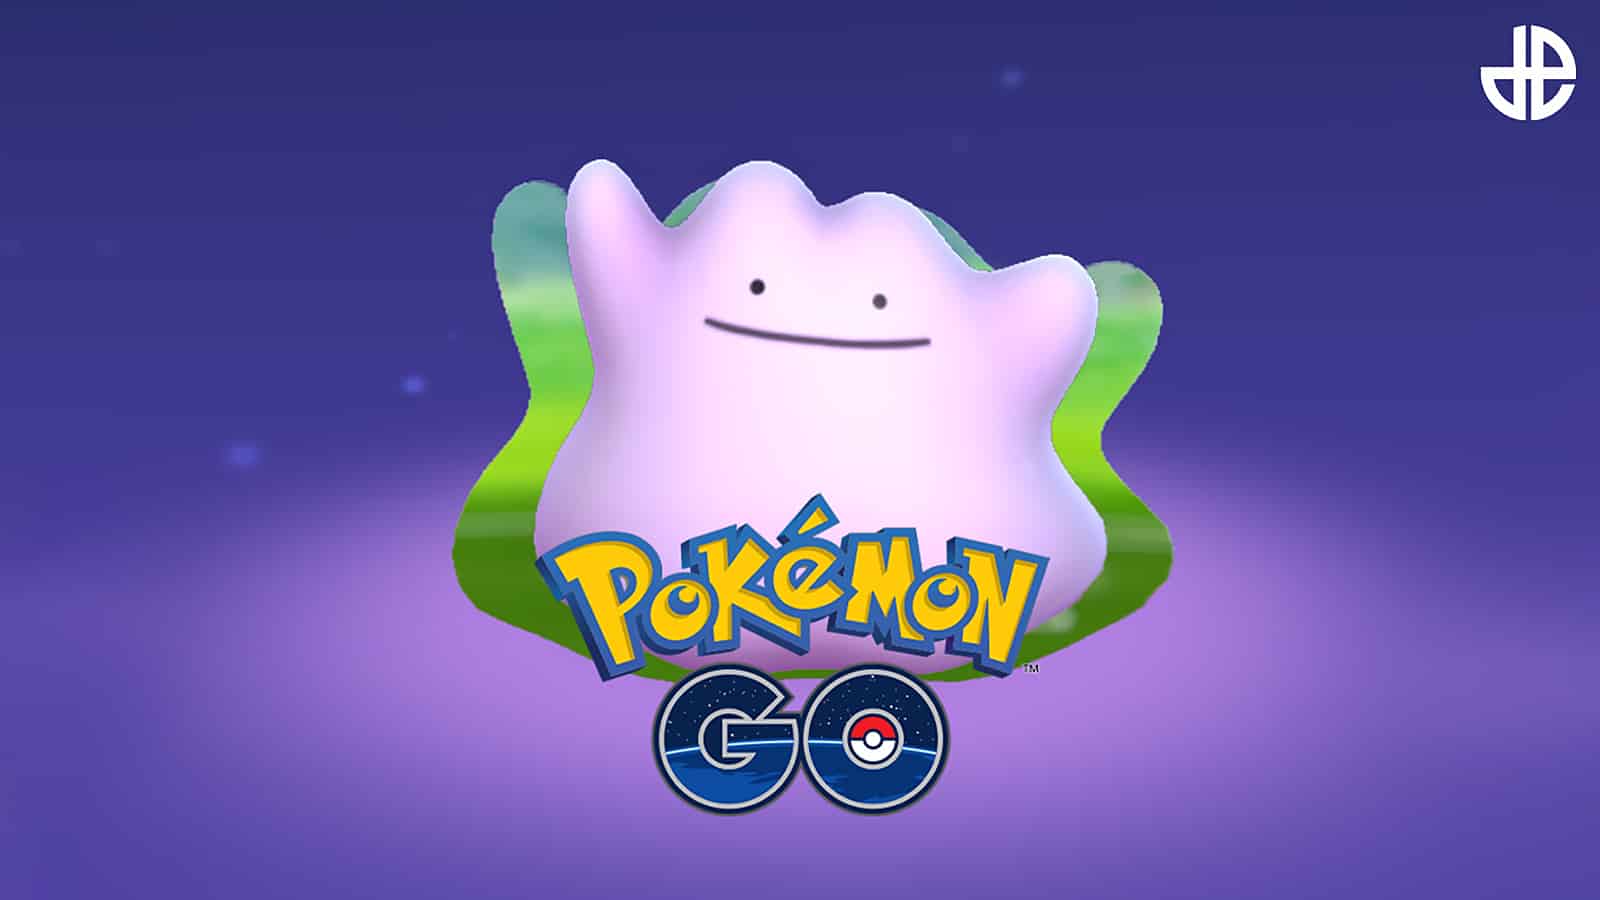 The Transform 'mon Ditto in Pokemon Go, who has lots of different disguises